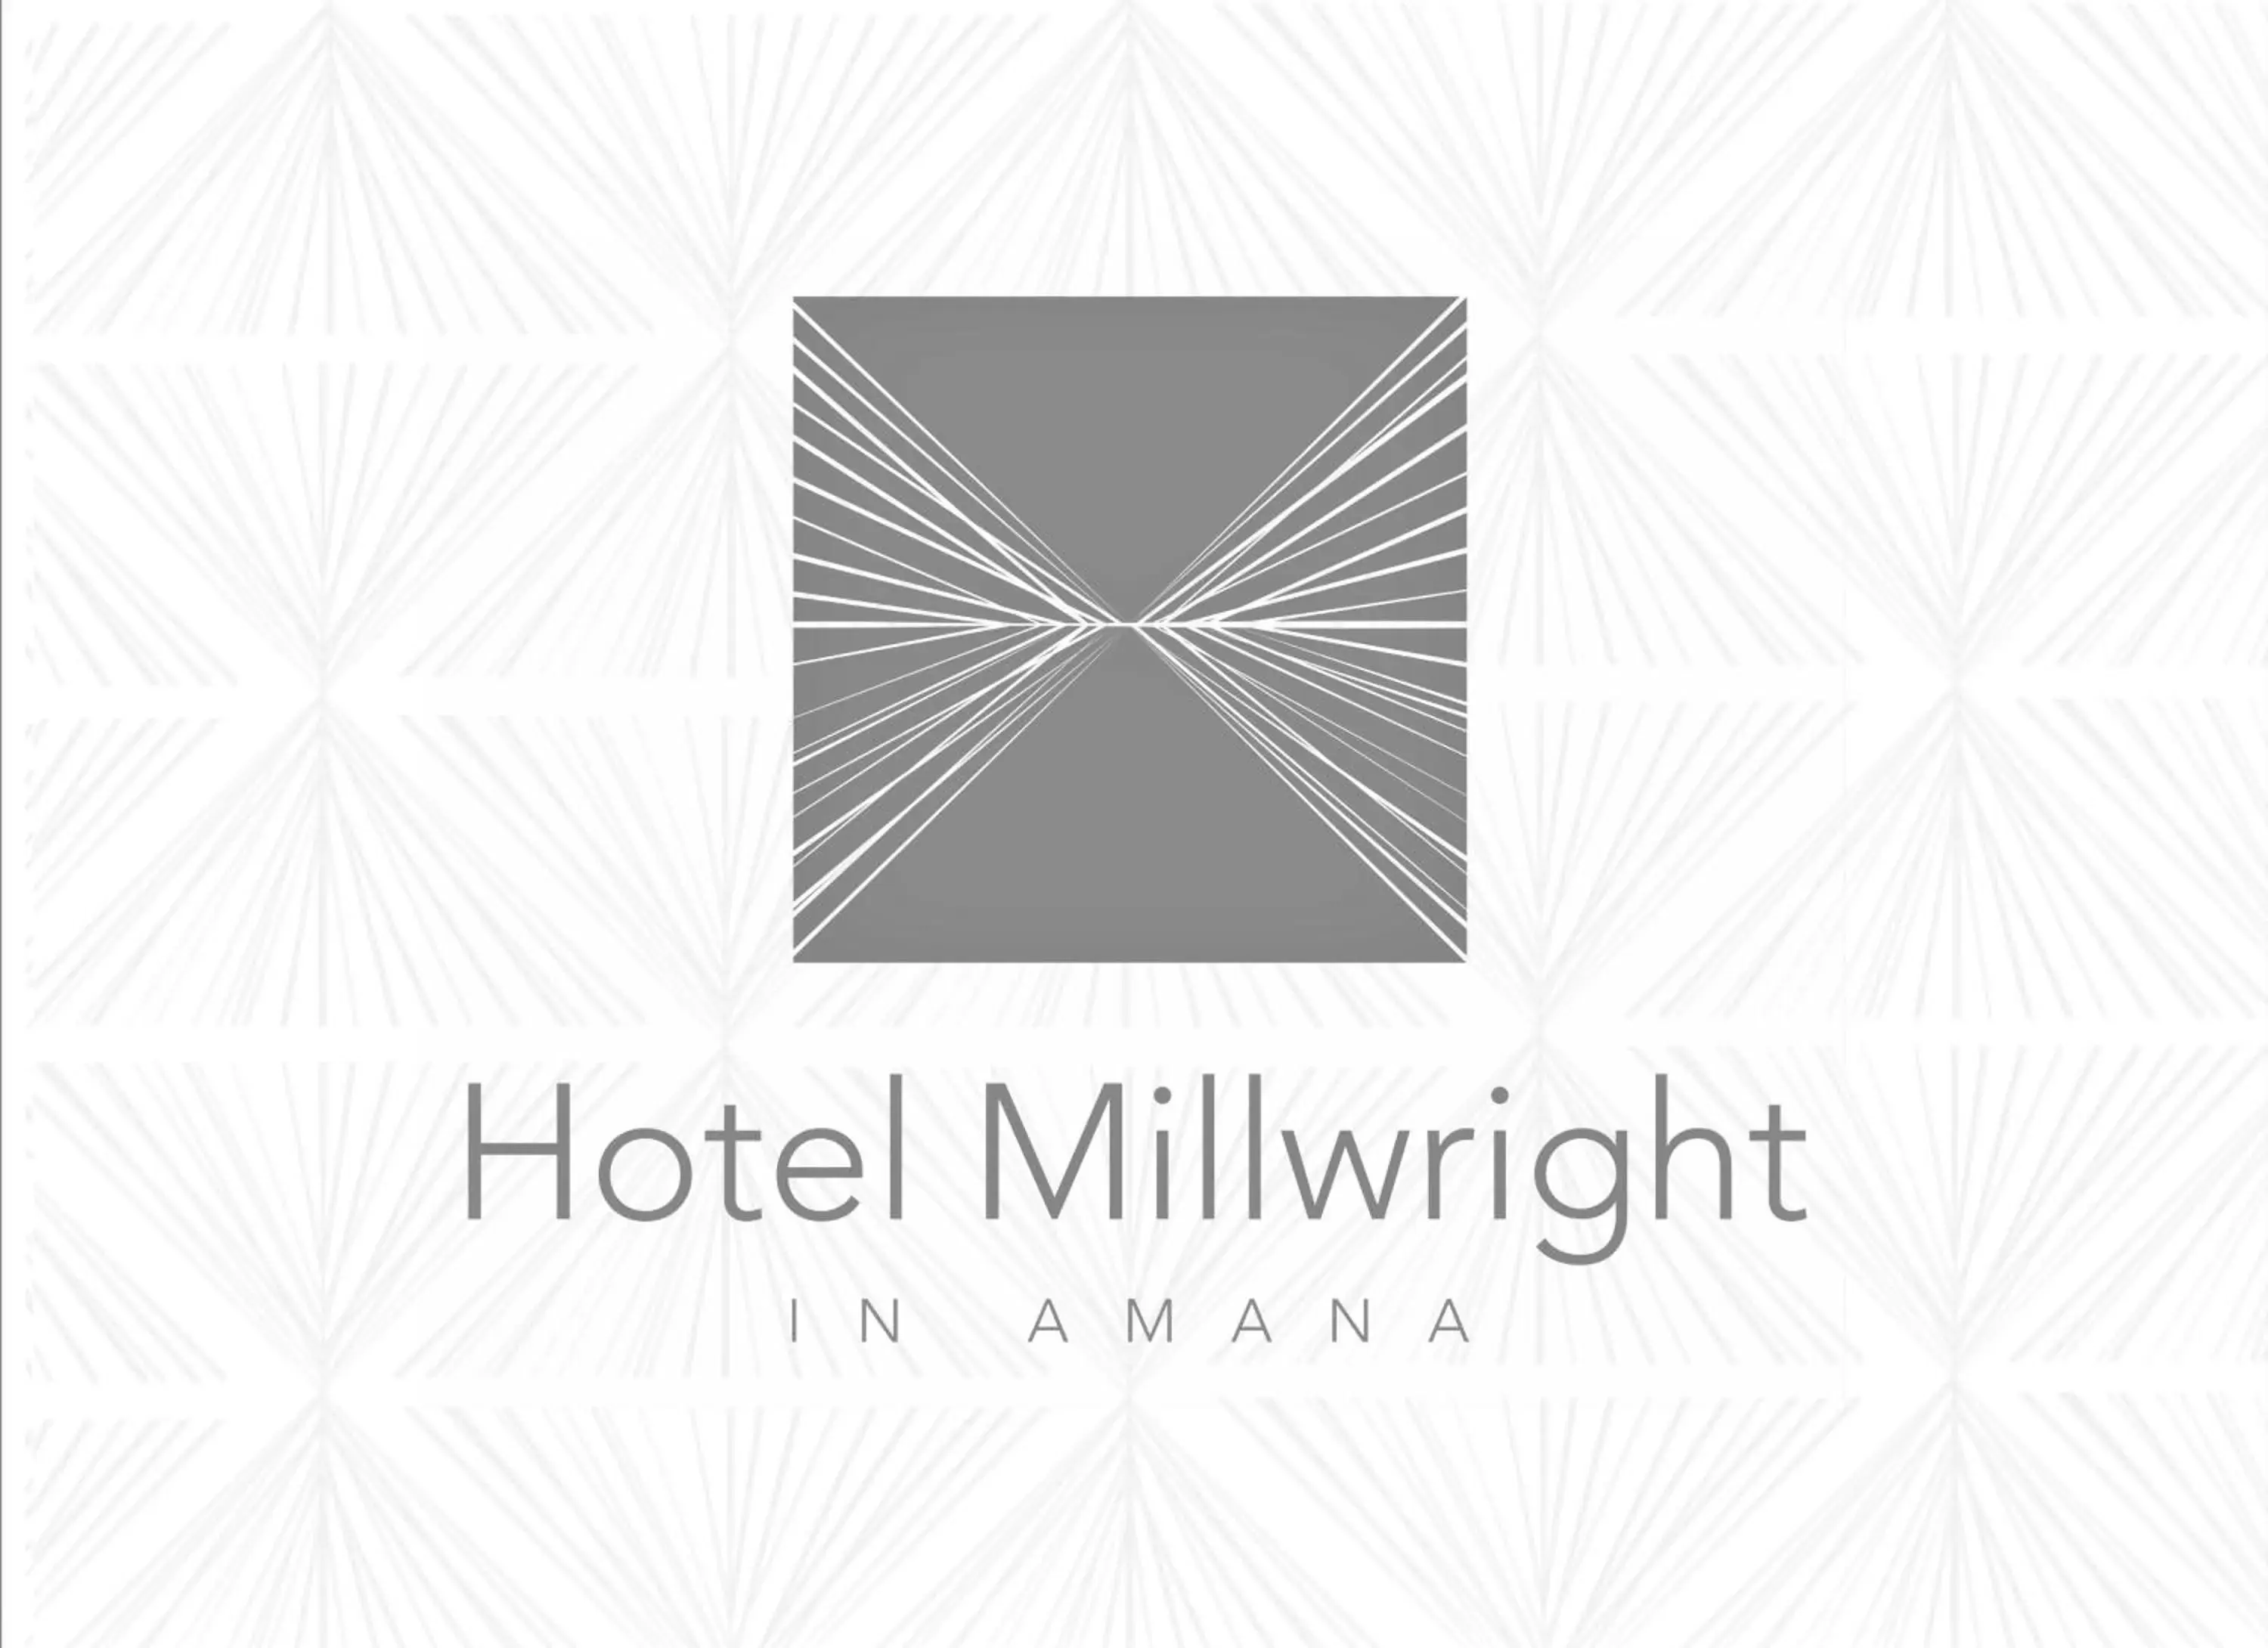 Property logo or sign in Hotel Millwright